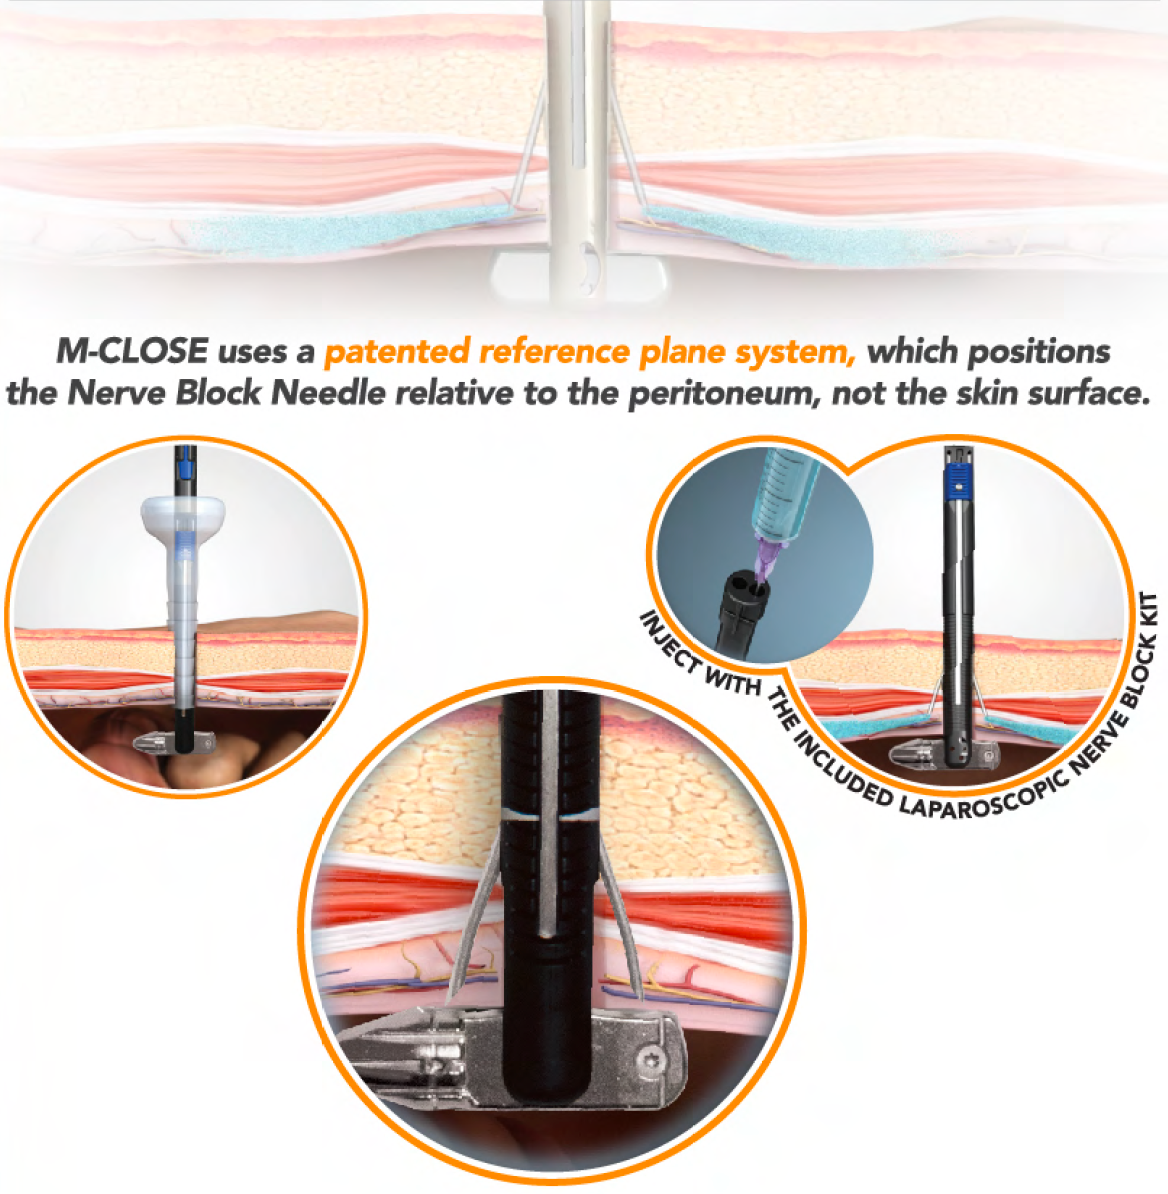 M-Close Kit for targeted local anaesthetic administration of laparoscopic port sites